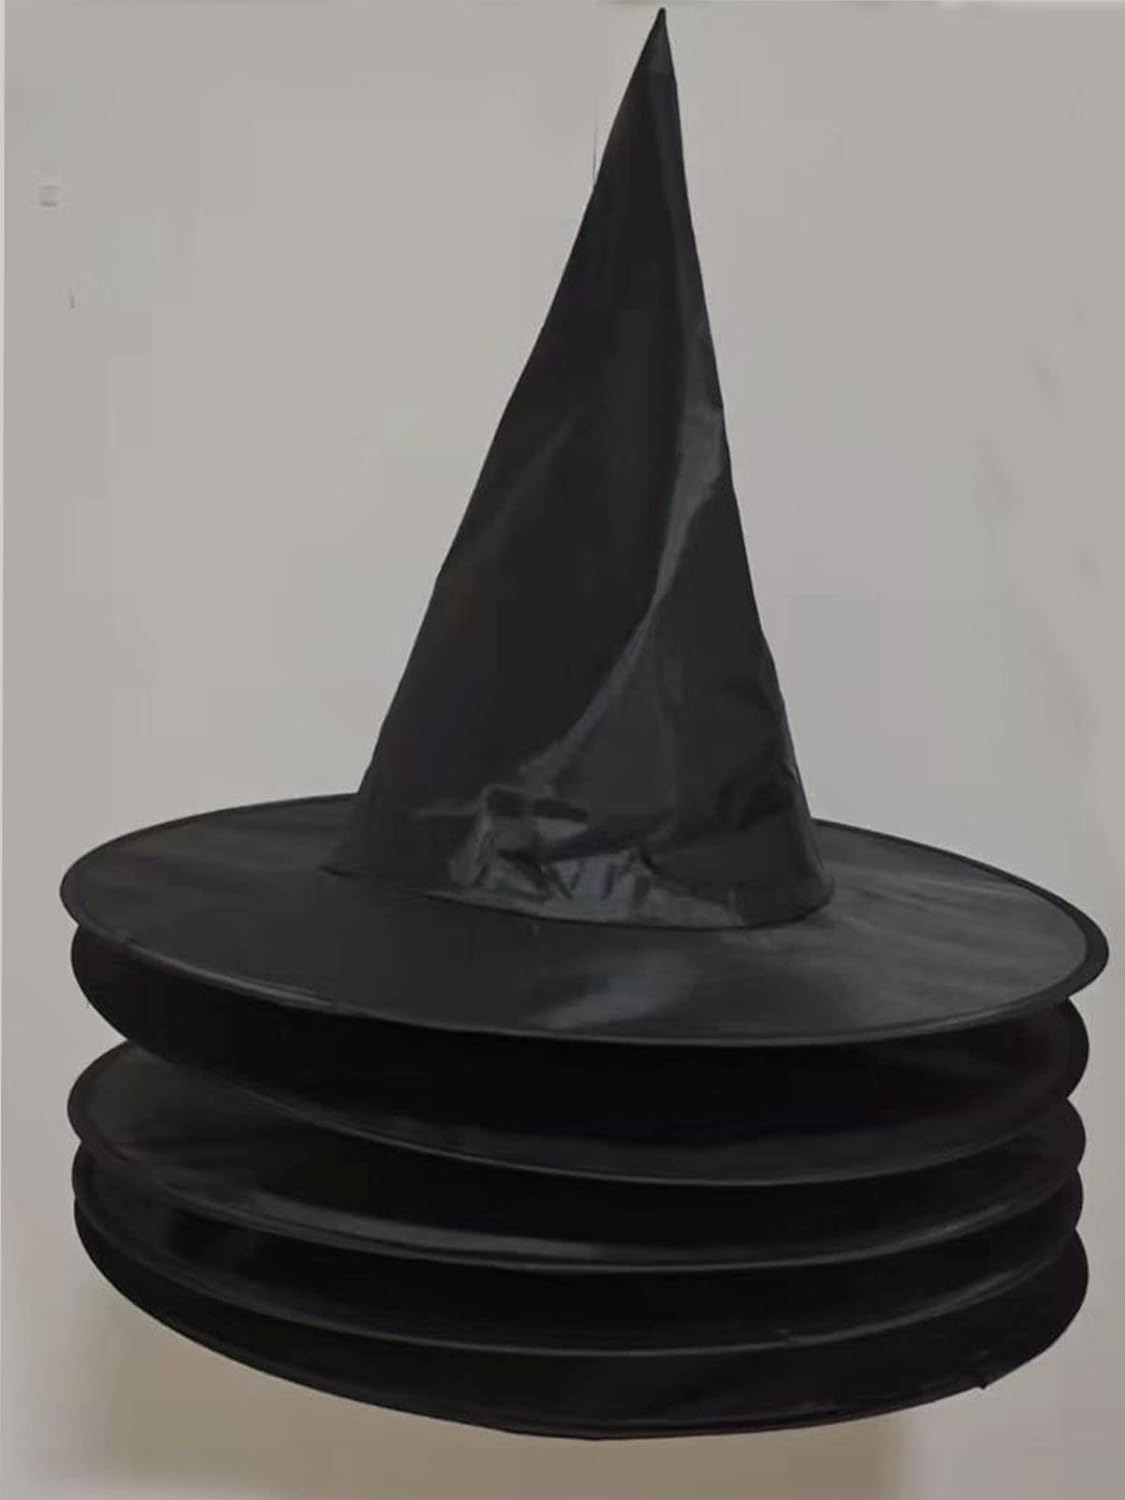 5Pcs Witches Hat,Halloween Witches Hats Decor,For Decoration of Large Halloween 